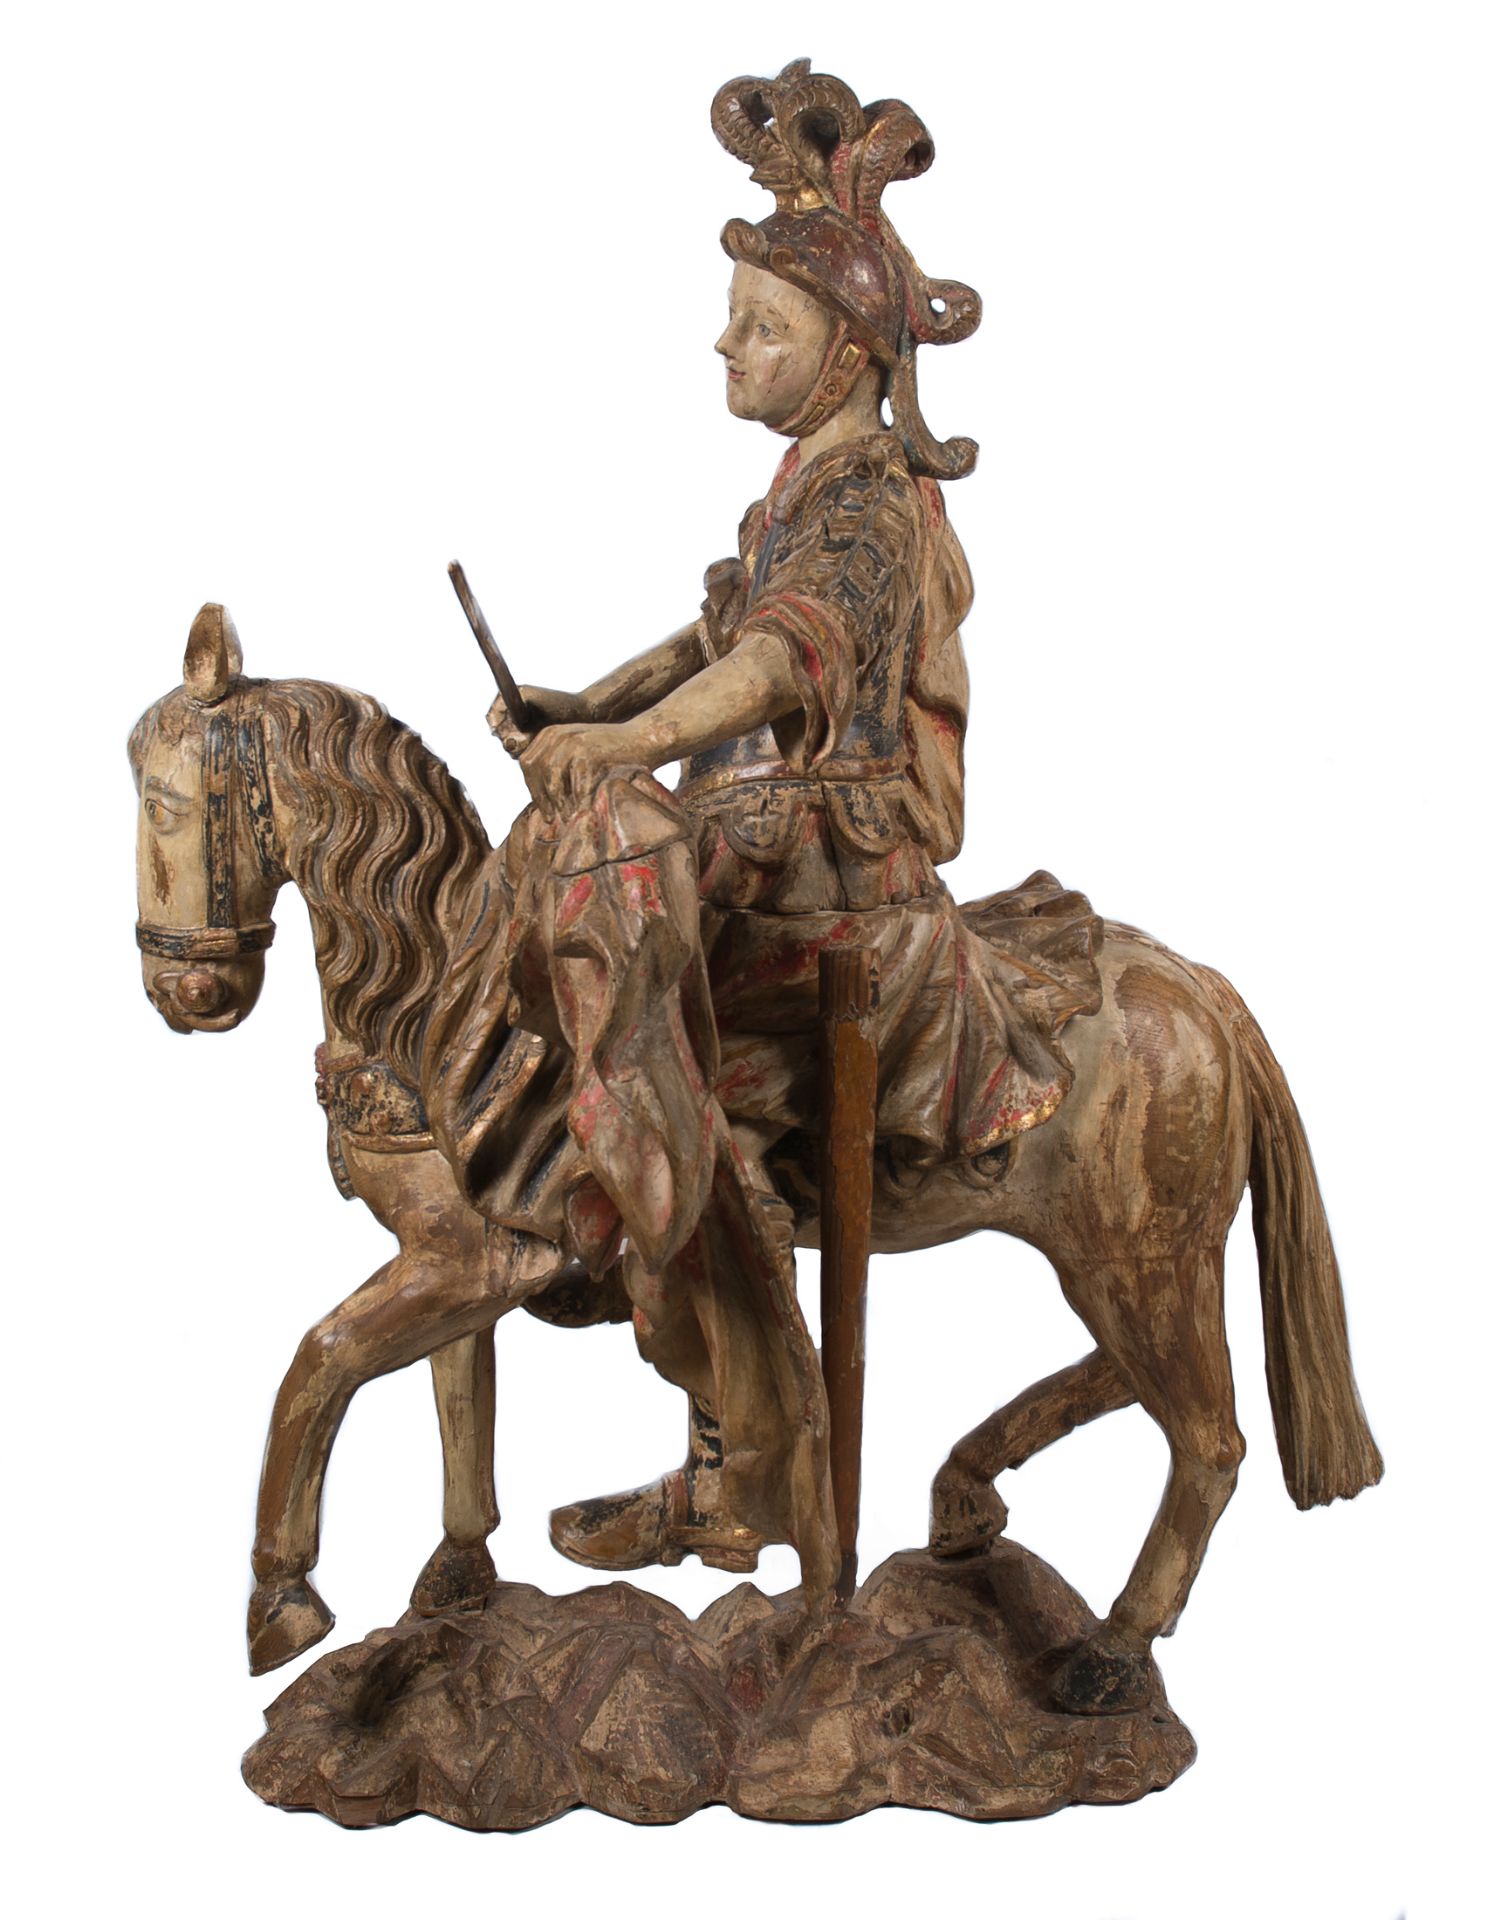 "Saint Martin". Imposing carved, polychromed and gilded wooden sculpture. Hispanic - Flemish